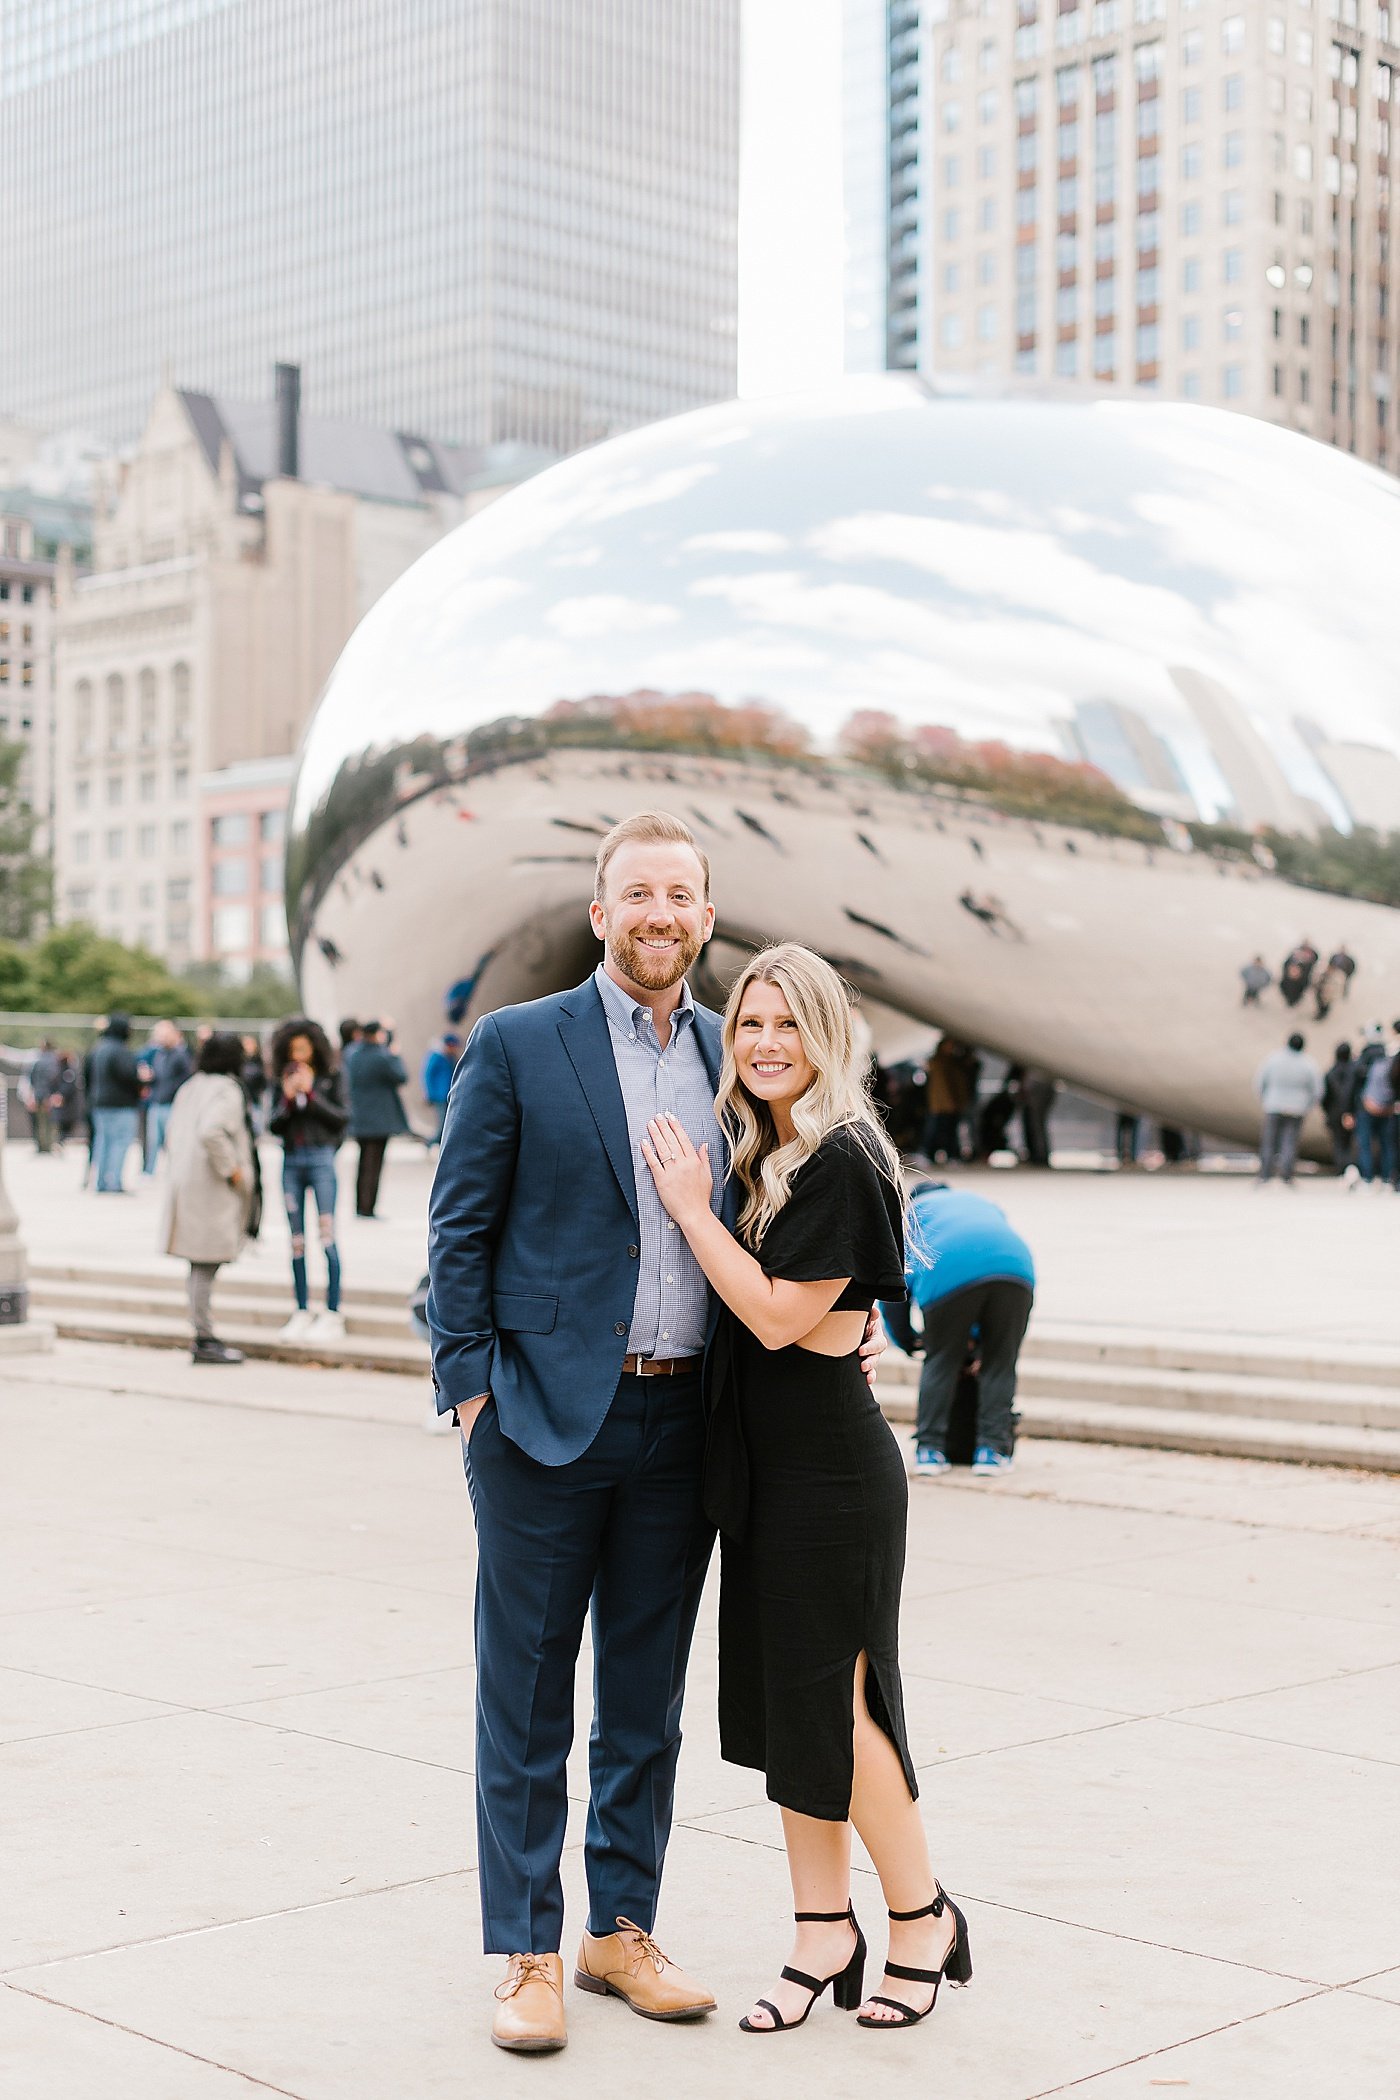 Keegan and Mark's Downtown Chicago Engagement Session Rebecca Shehorn Photography25.jpg